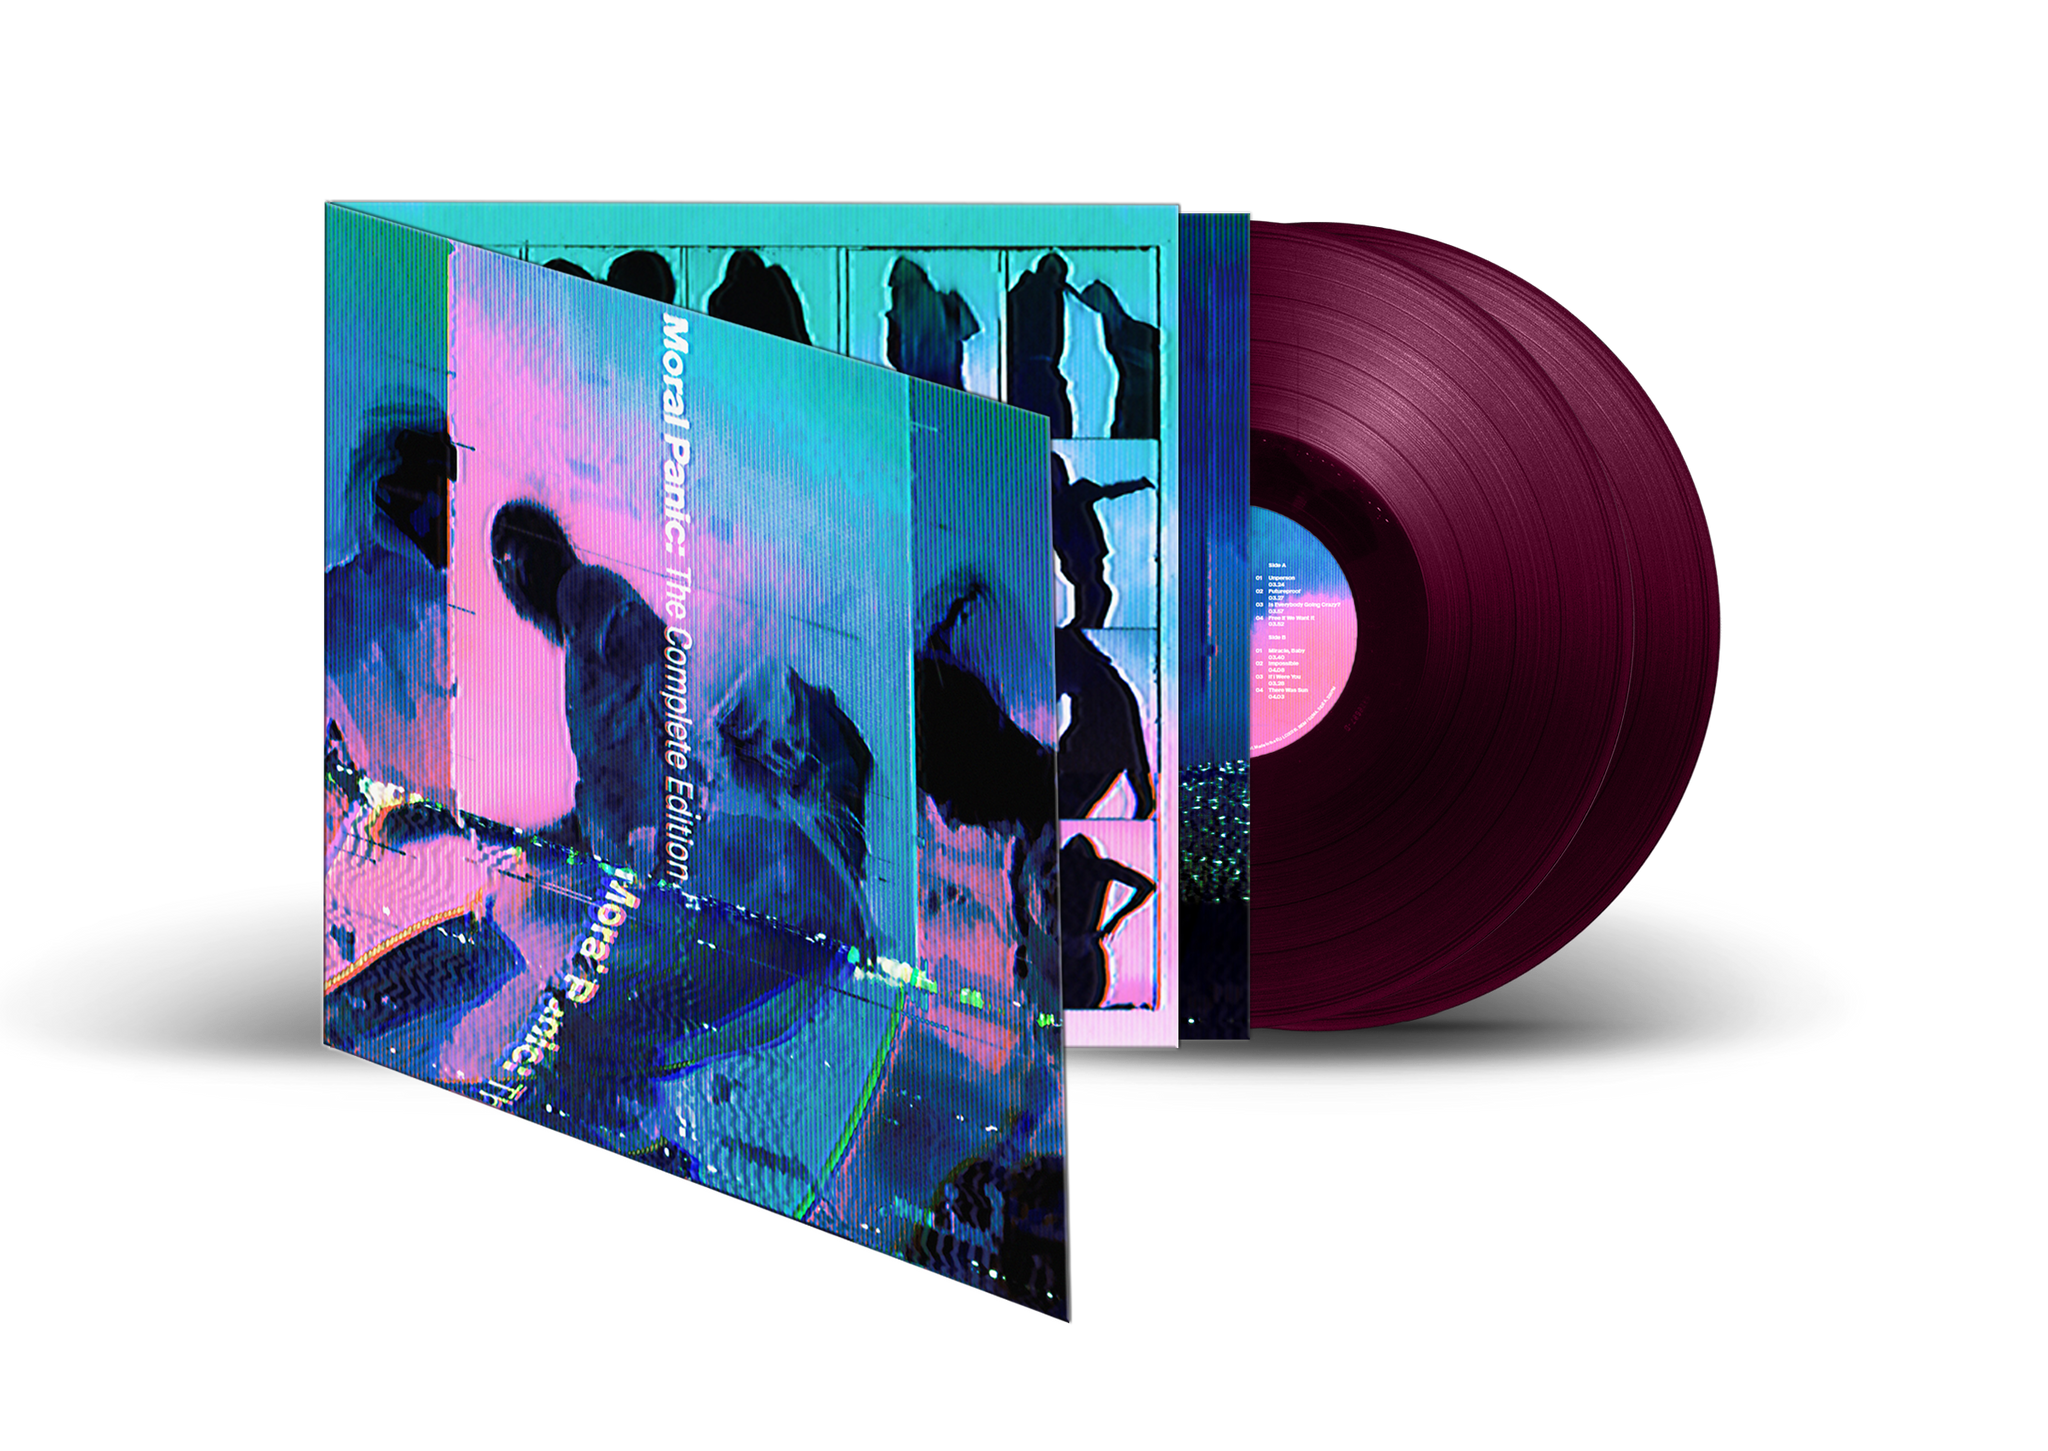 Nothing But Thieves - Moral Panic (The Complete Edition) (2LP Plum Vinyl)